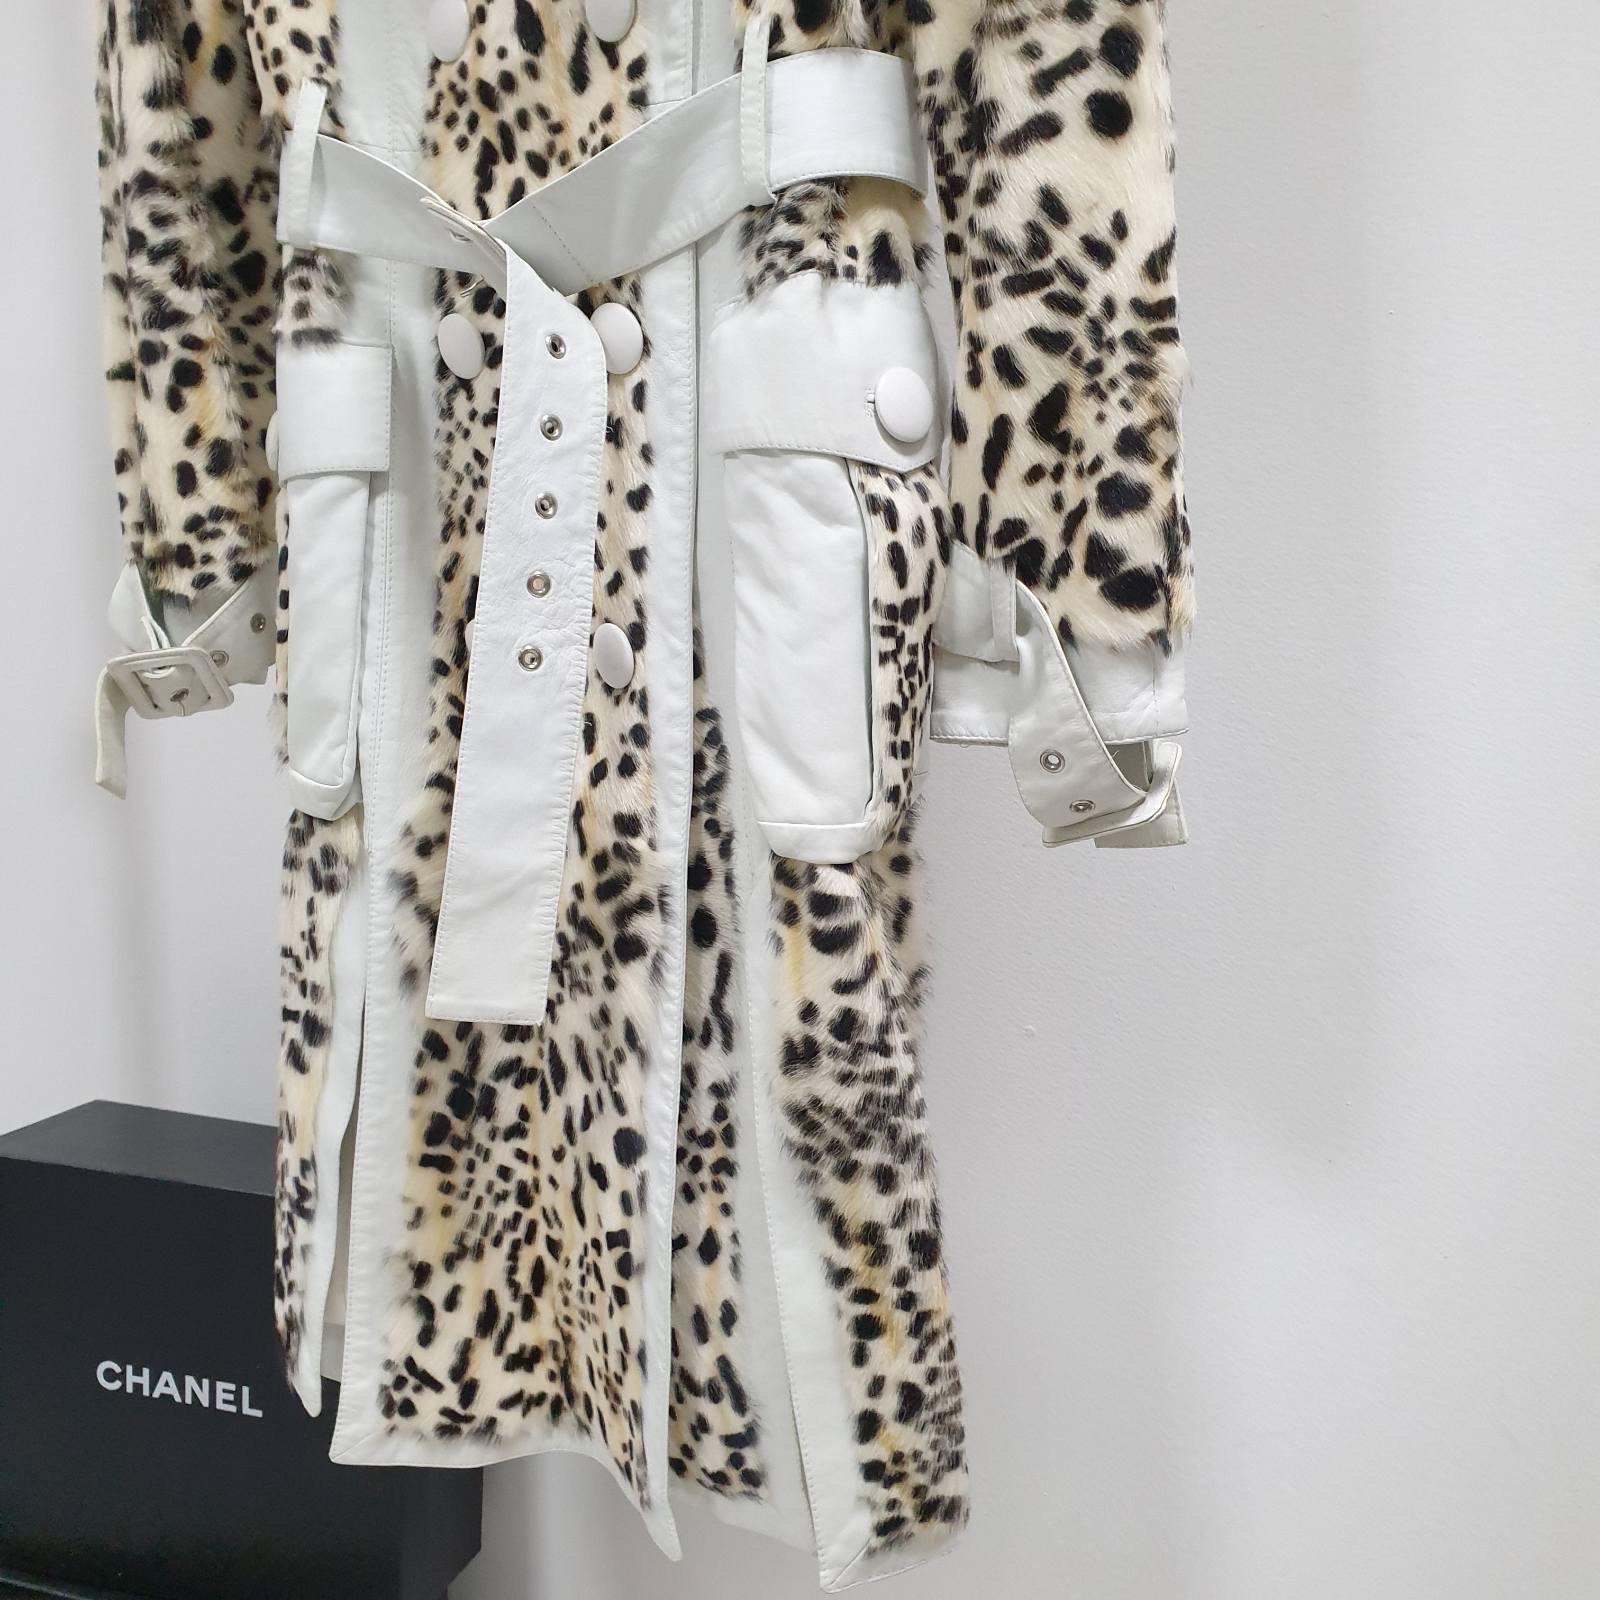 Christian Dior Lynx Print Leather and Goat Fur Coat
 - White and Black Coat
 - Lynx Spotty Printed
 - White lambskin leather
- Goat details
 - Wide lapel, double breasted
- Dual side pockets
- Leather belt at waist
 - Belted sleeves
- Silk